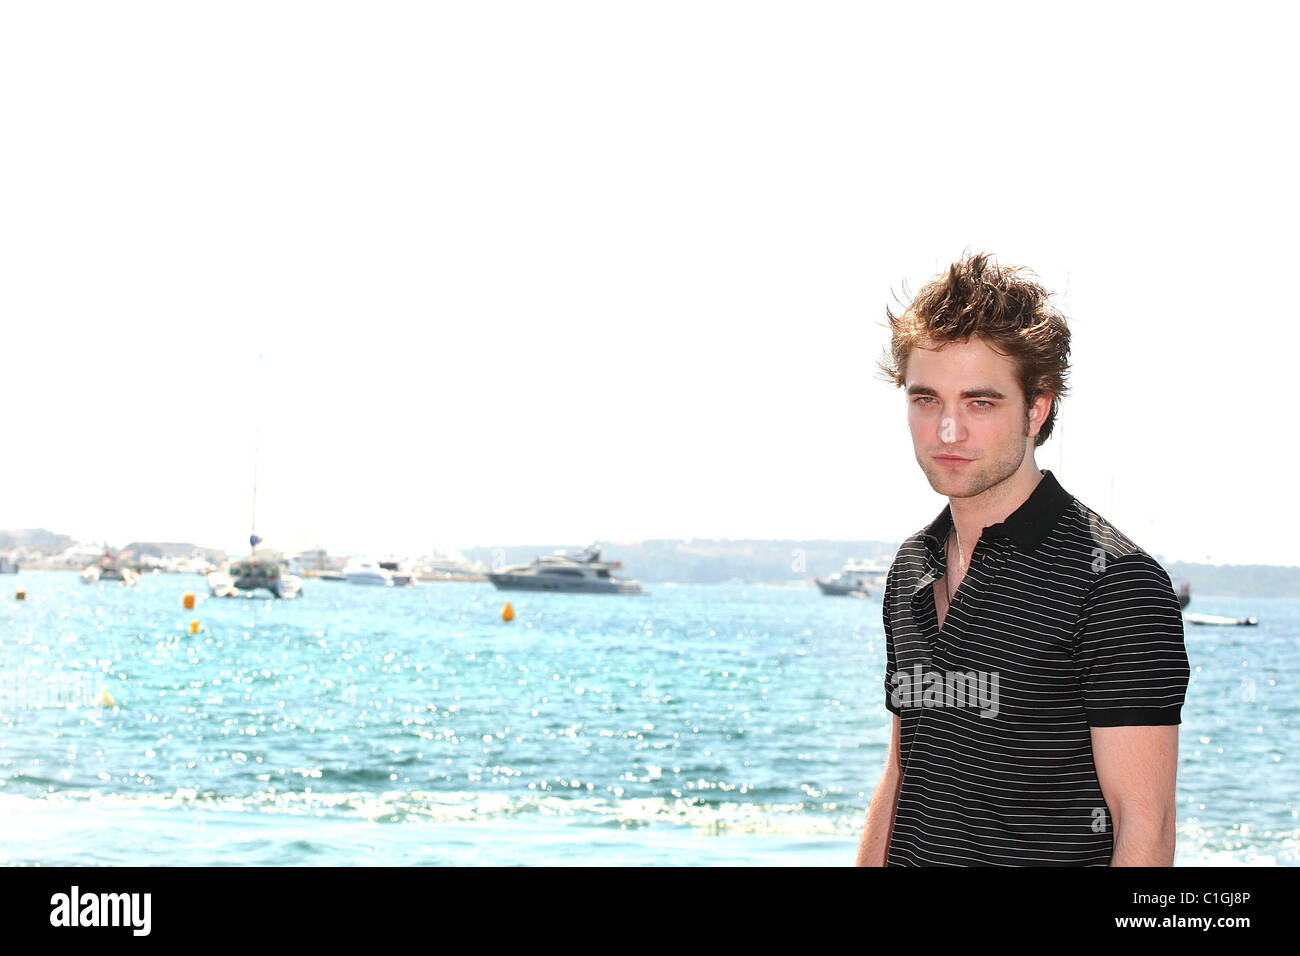 Robert Pattinson The 62nd Cannes Film Festival 2009 Day 7 New Moon, Twilight series - photocall Cannes, Frances - 19.05.09 Stock Photo